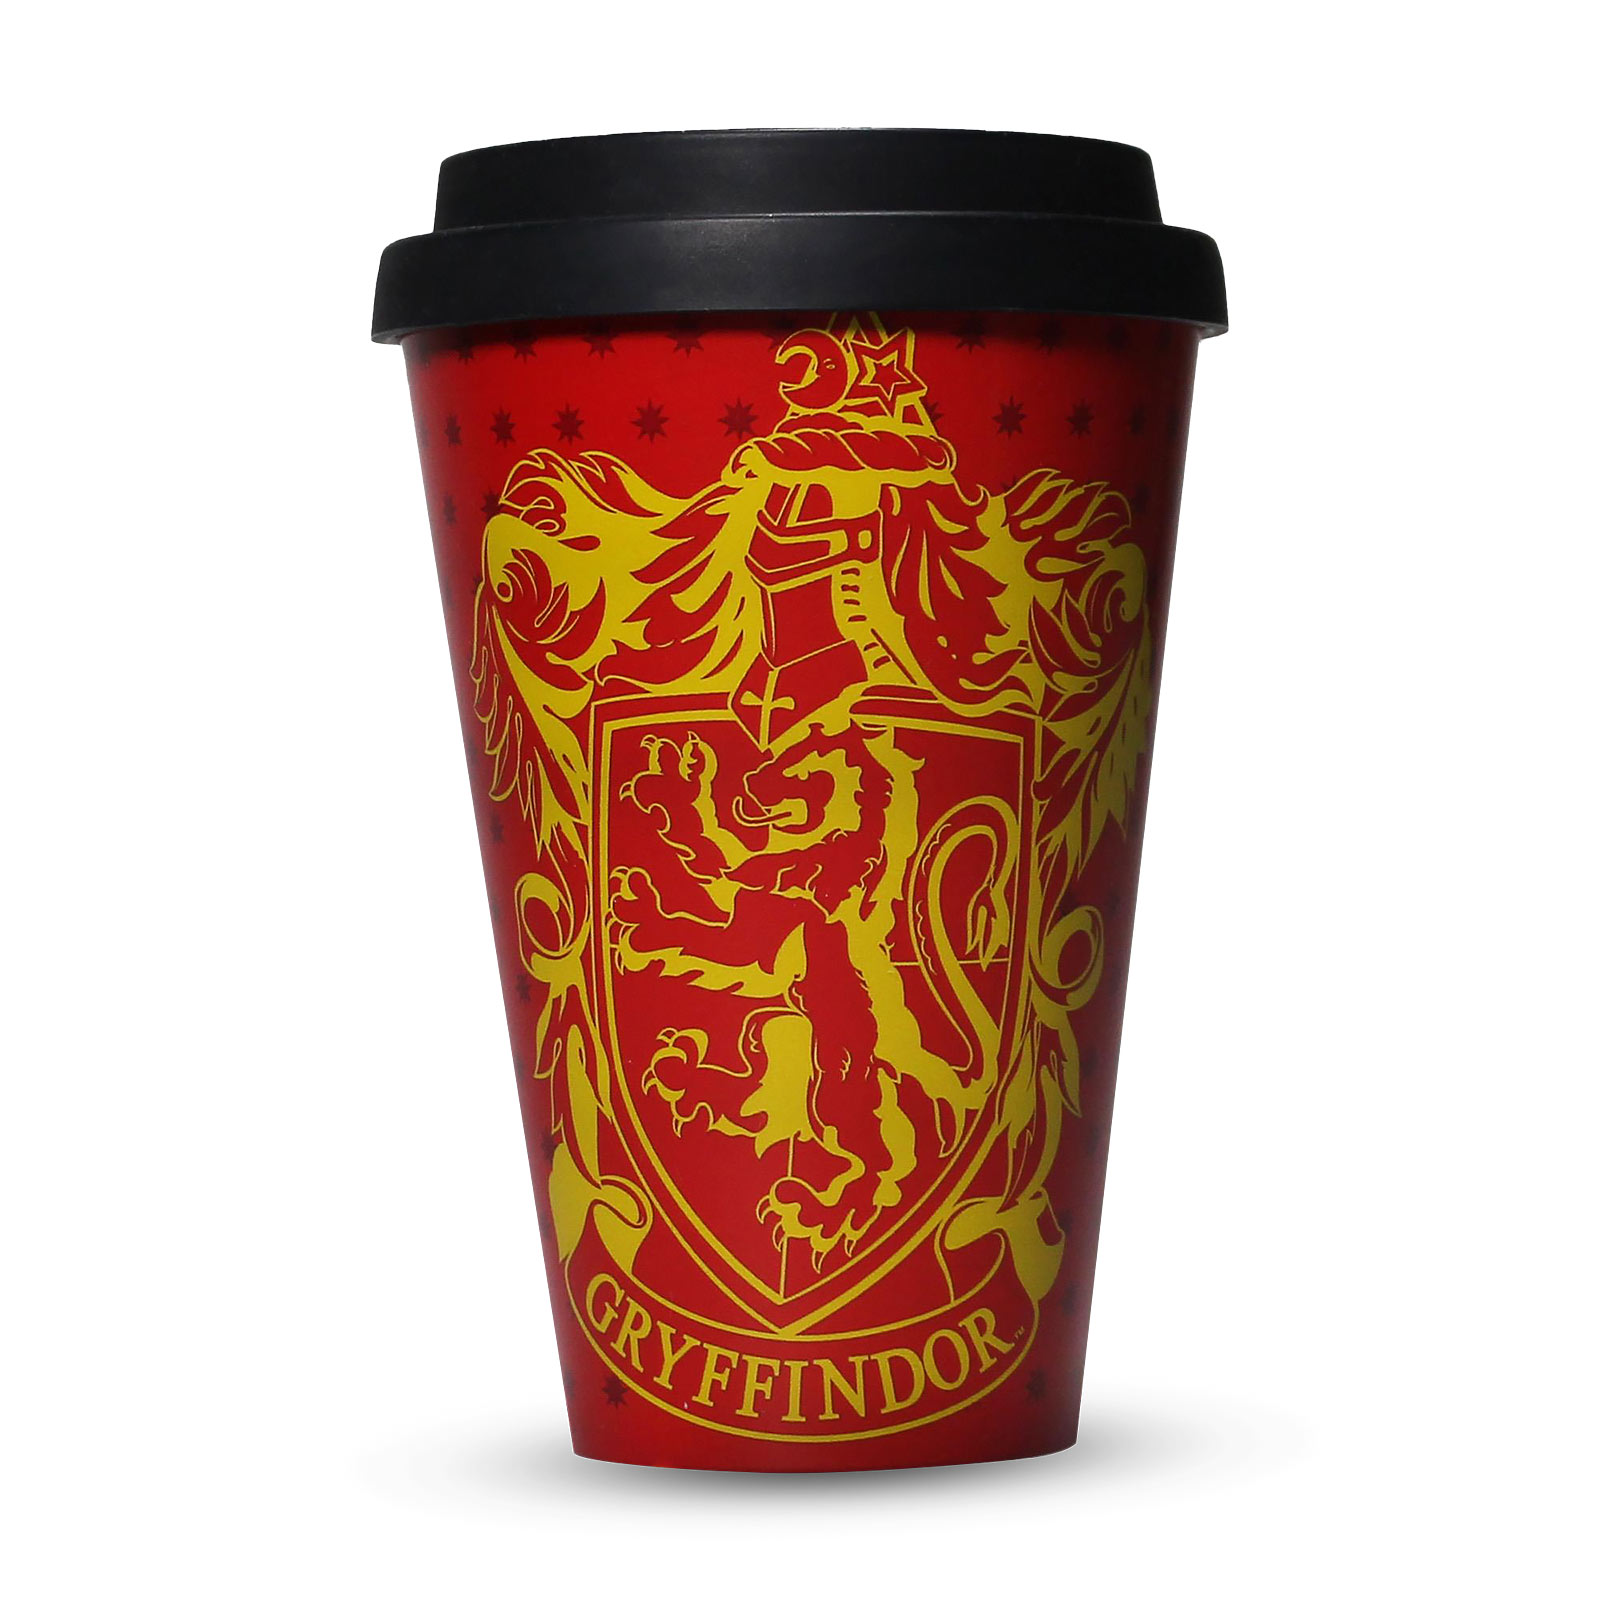 Harry Potter - Proud Gryffindor To Go Cup